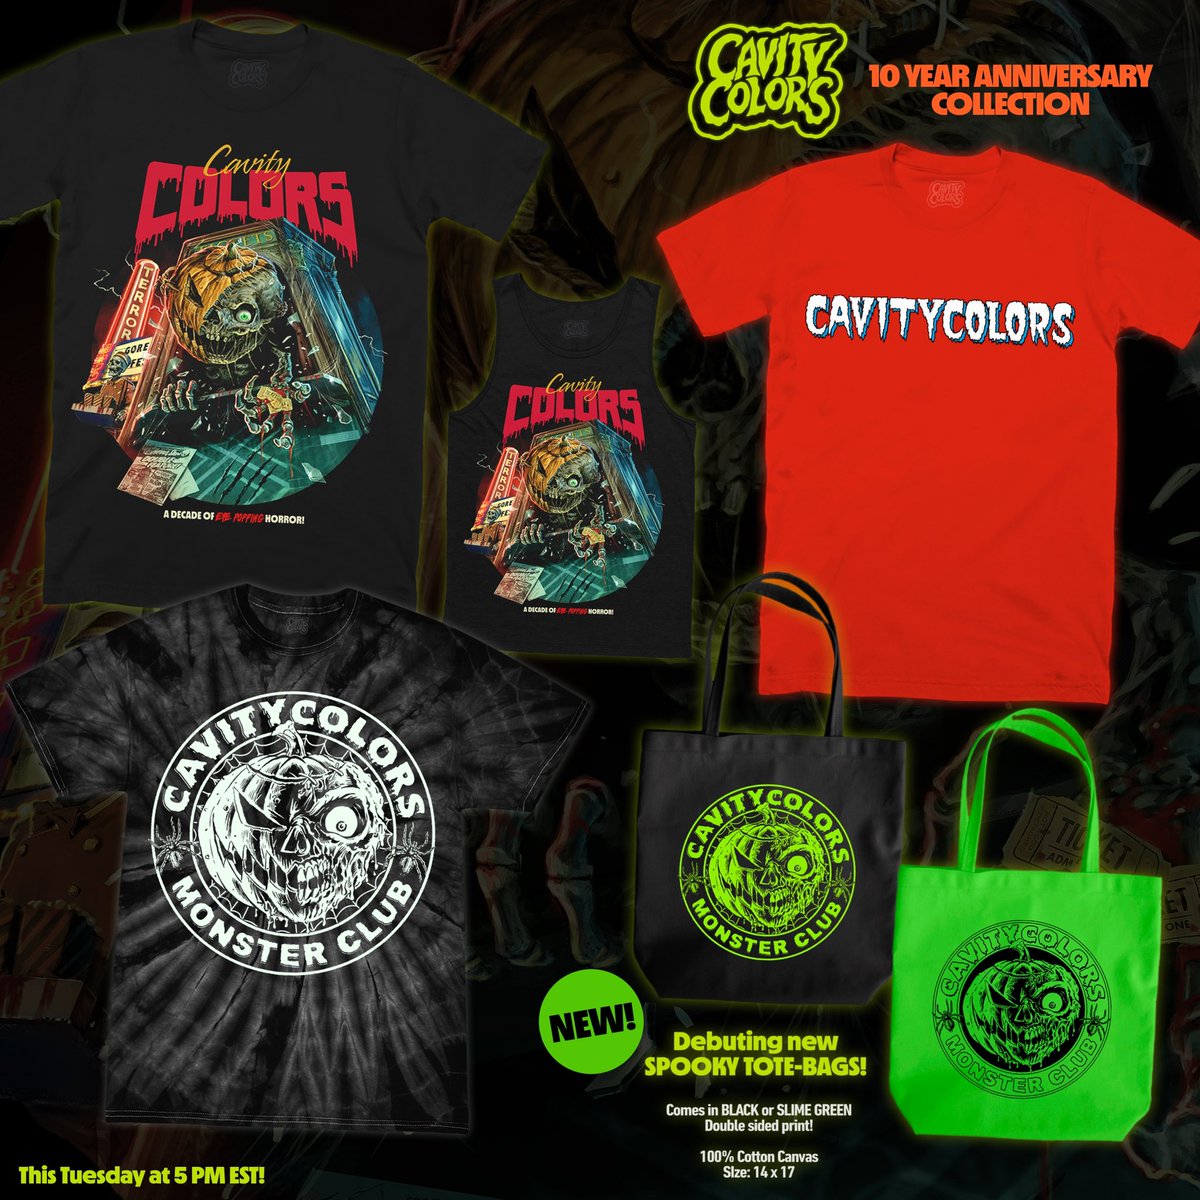 🥳 CAVITYCOLORS 10 Year Anniversary Collection reveal! 🎃This Tuesday, June 21st at 5 PM EST, we’re celebrating a DECADE of our brand with new original tees, summer tanks, and new tote bags! Details in this thread! 👇